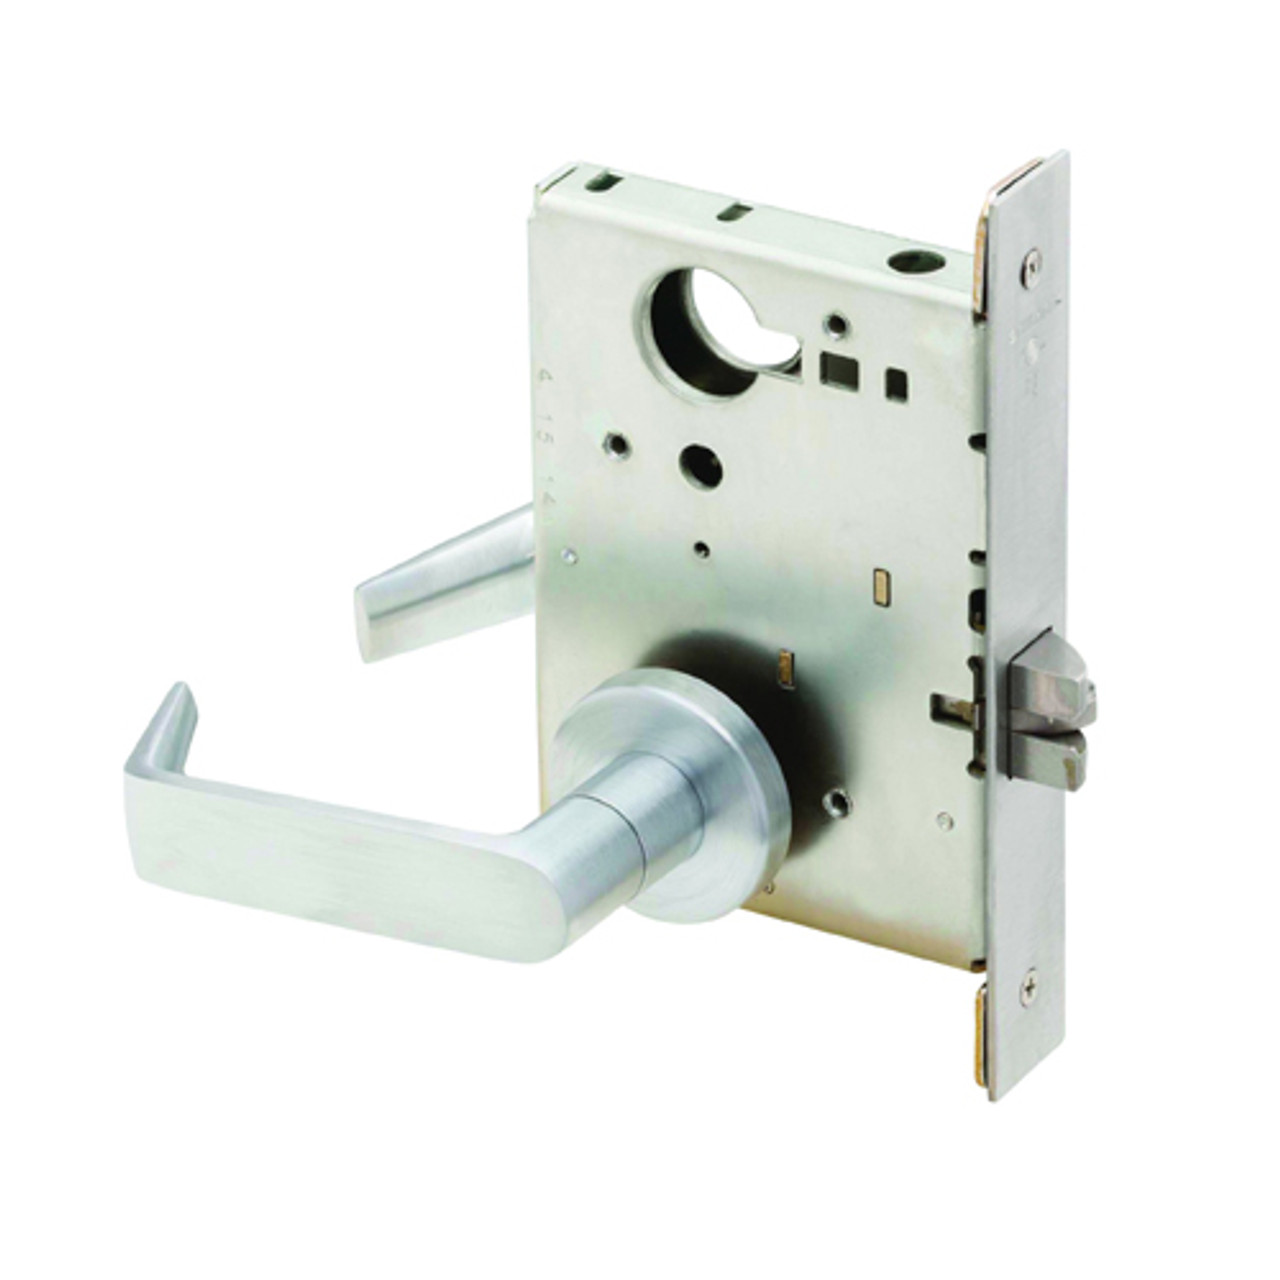 L9010-06A-605 Schlage L Series Passage Latch Commercial Mortise Lock with 06 Cast Lever Design in Bright Brass